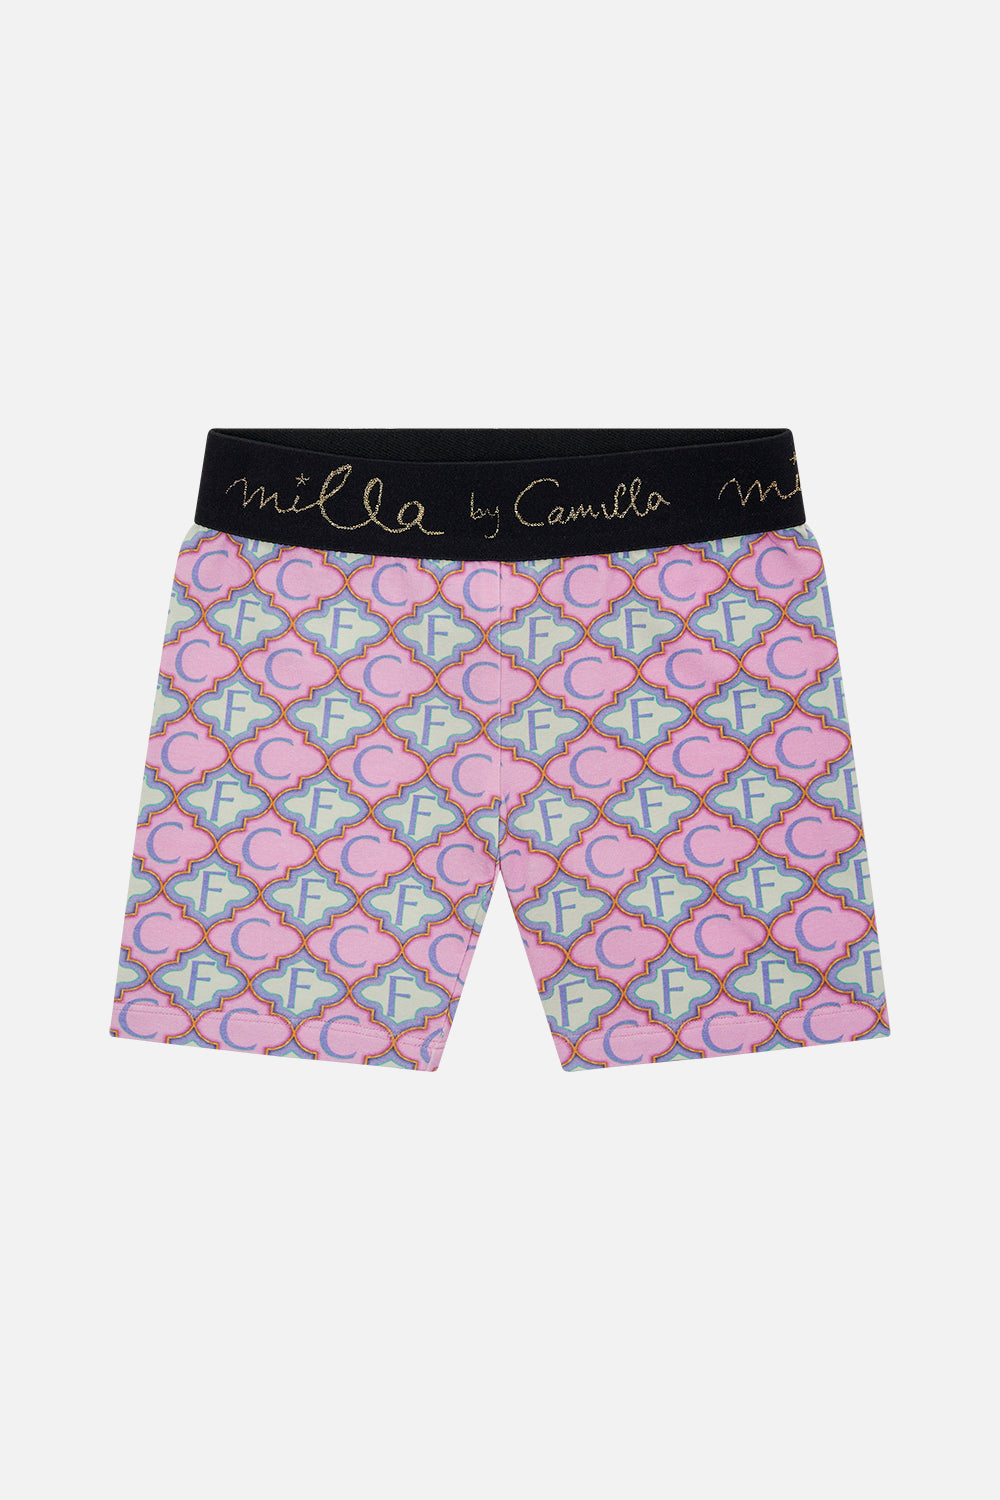 Product view of MILLA BY CAMILLA kids bike short in Tiptoe The Tightrope print